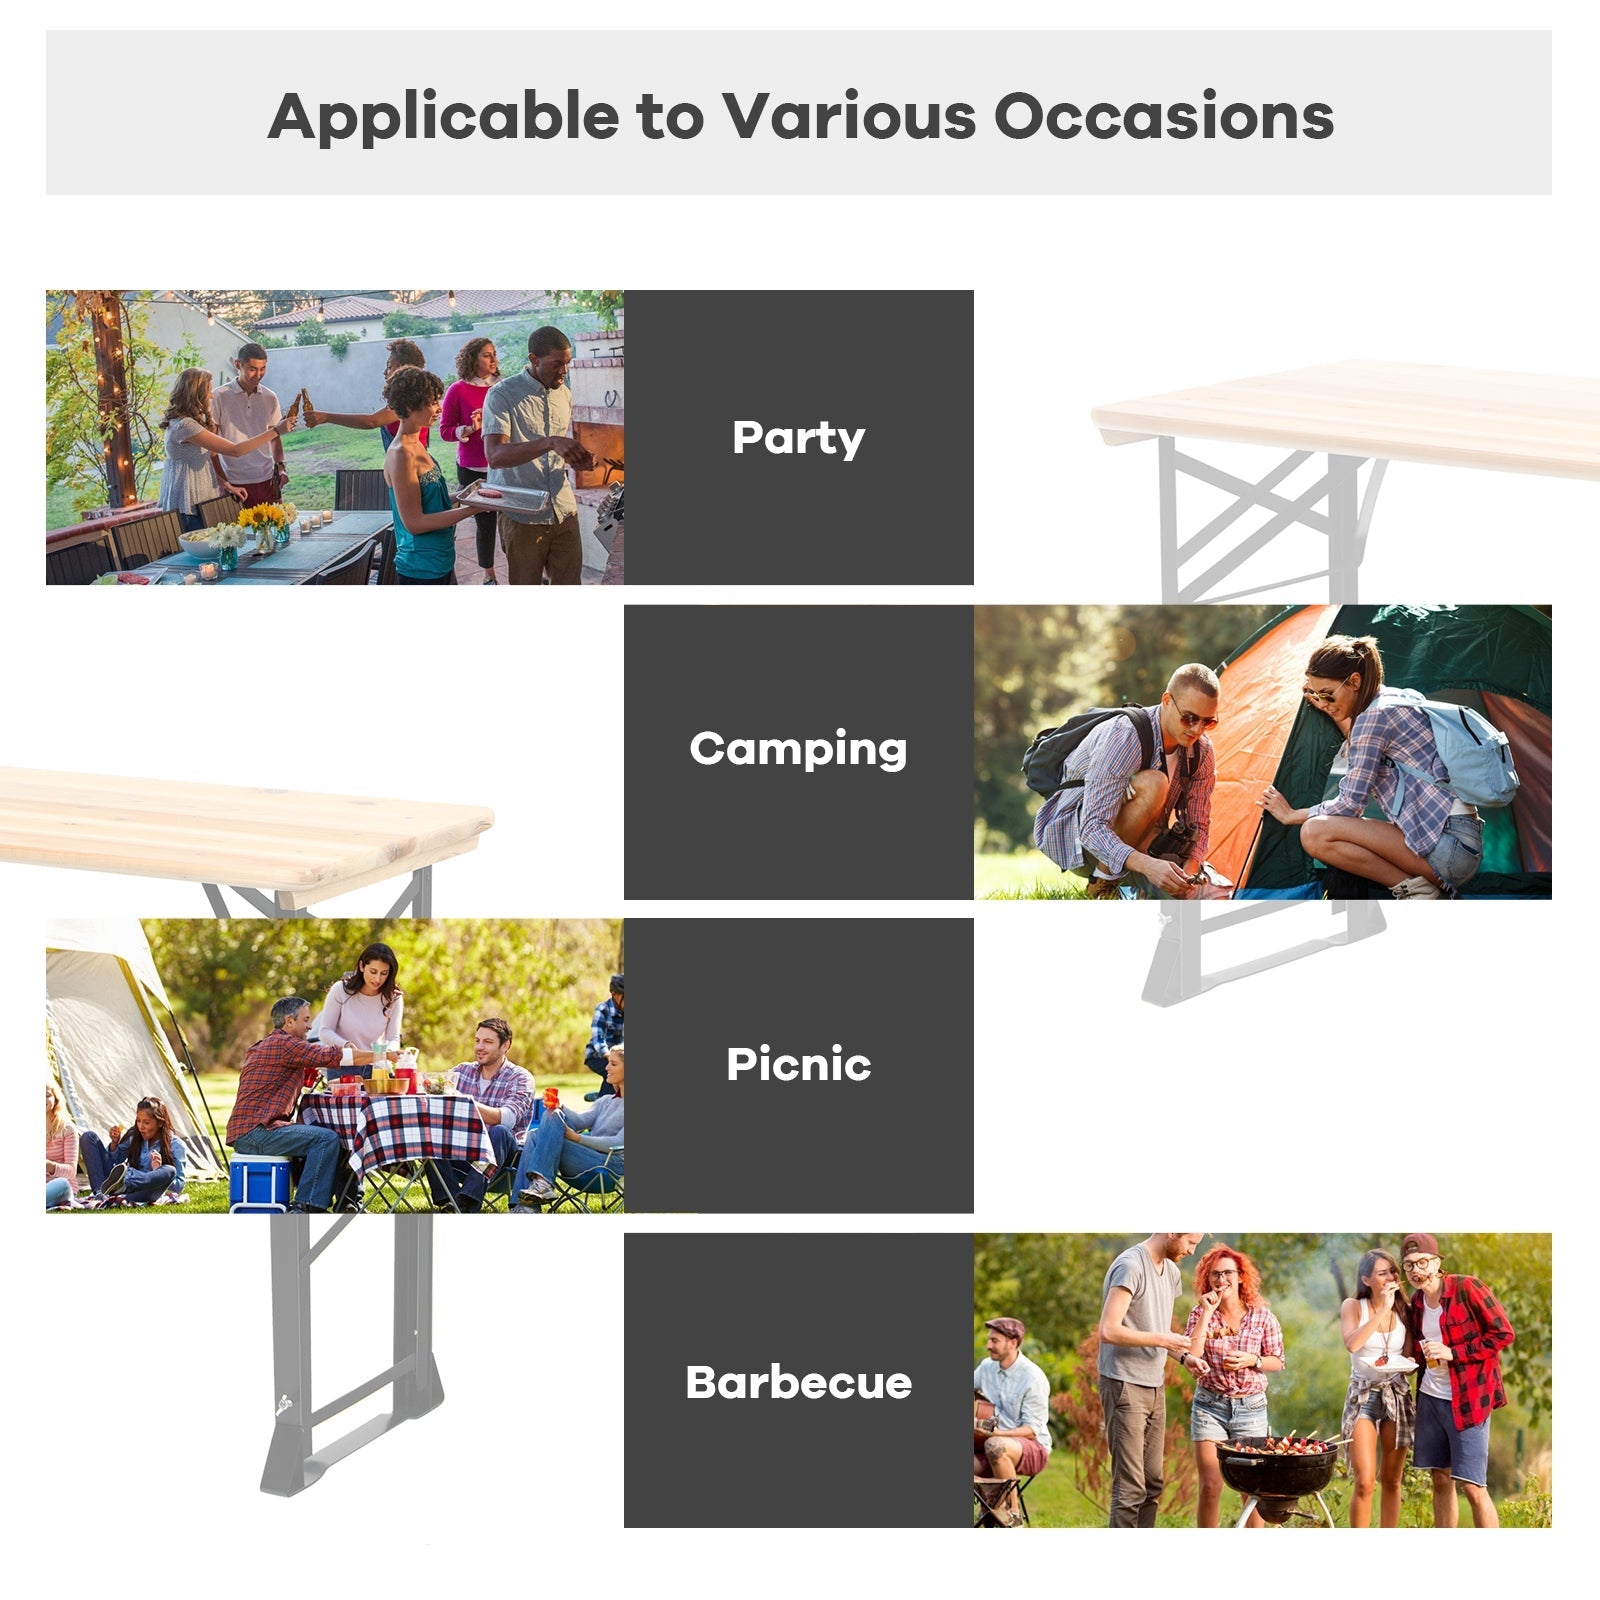 66.5 Inch Adjustable Heights Folding Beer Table with Umbrella Hole for Camping and Picnic